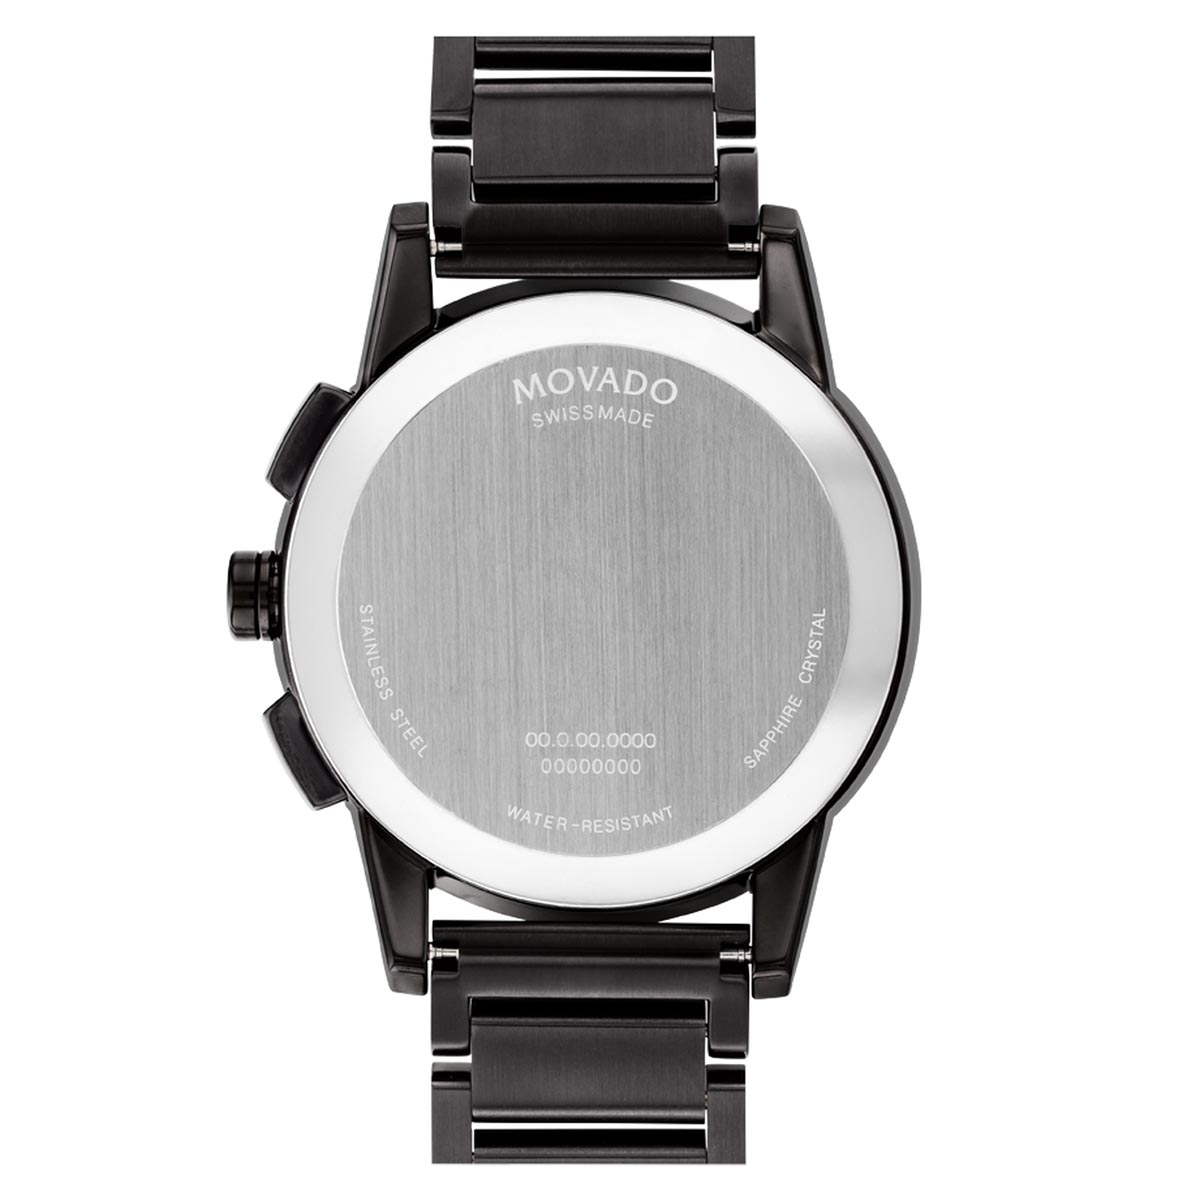 Movado Museum Sport Chronograph Mens Watch with Black Dial and Black Stainless Steel Bracelet (Swiss quartz movement)